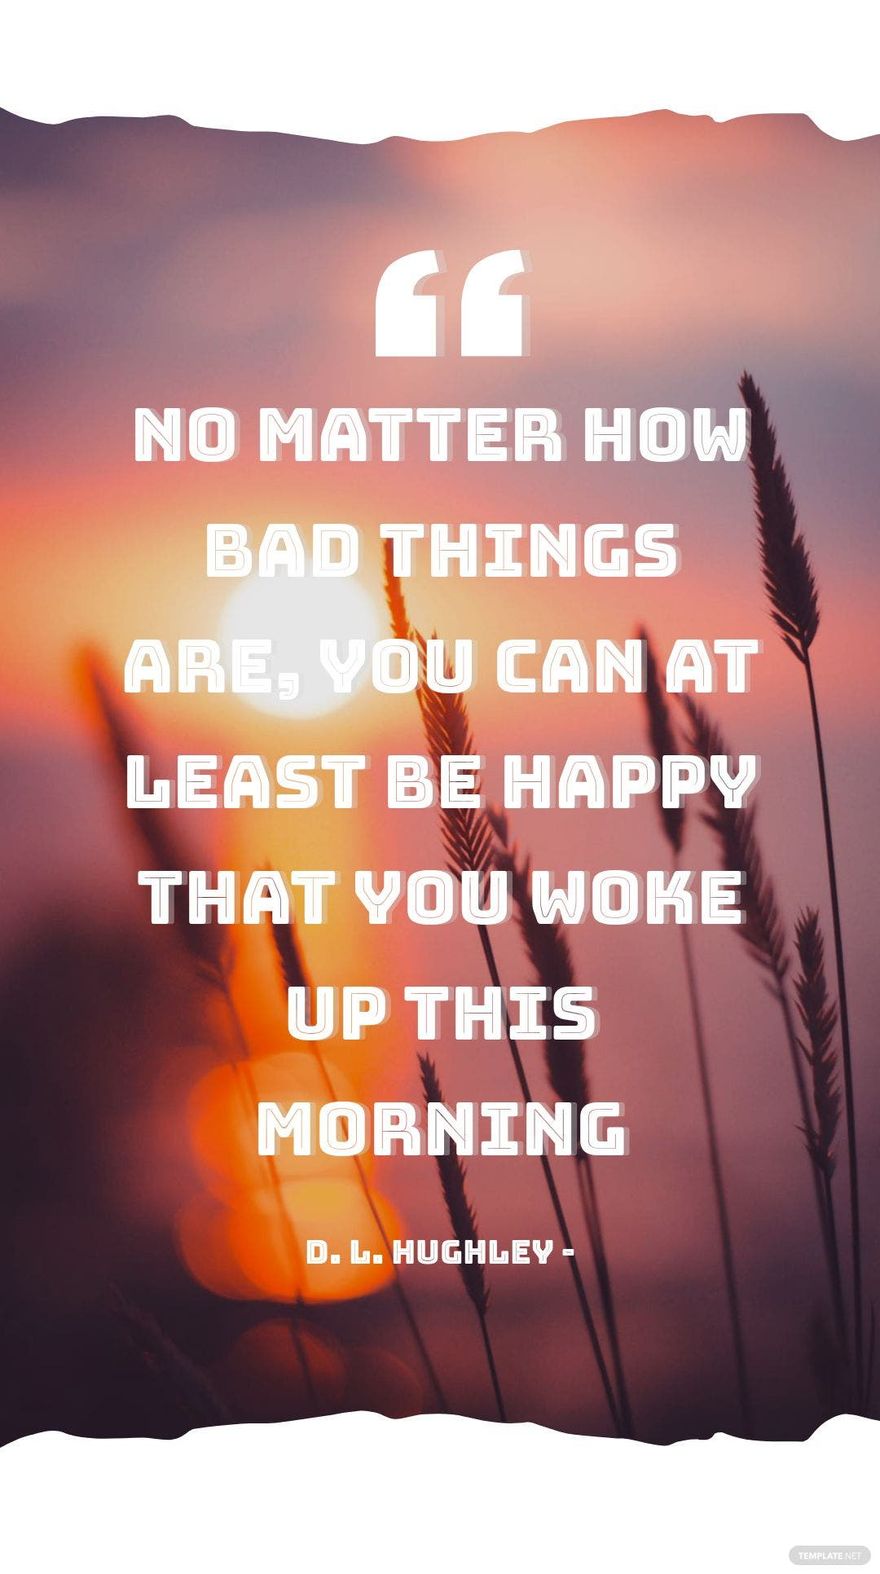 D. L. Hughley - No matter how bad things are, you can at least be happy that you woke up this morning